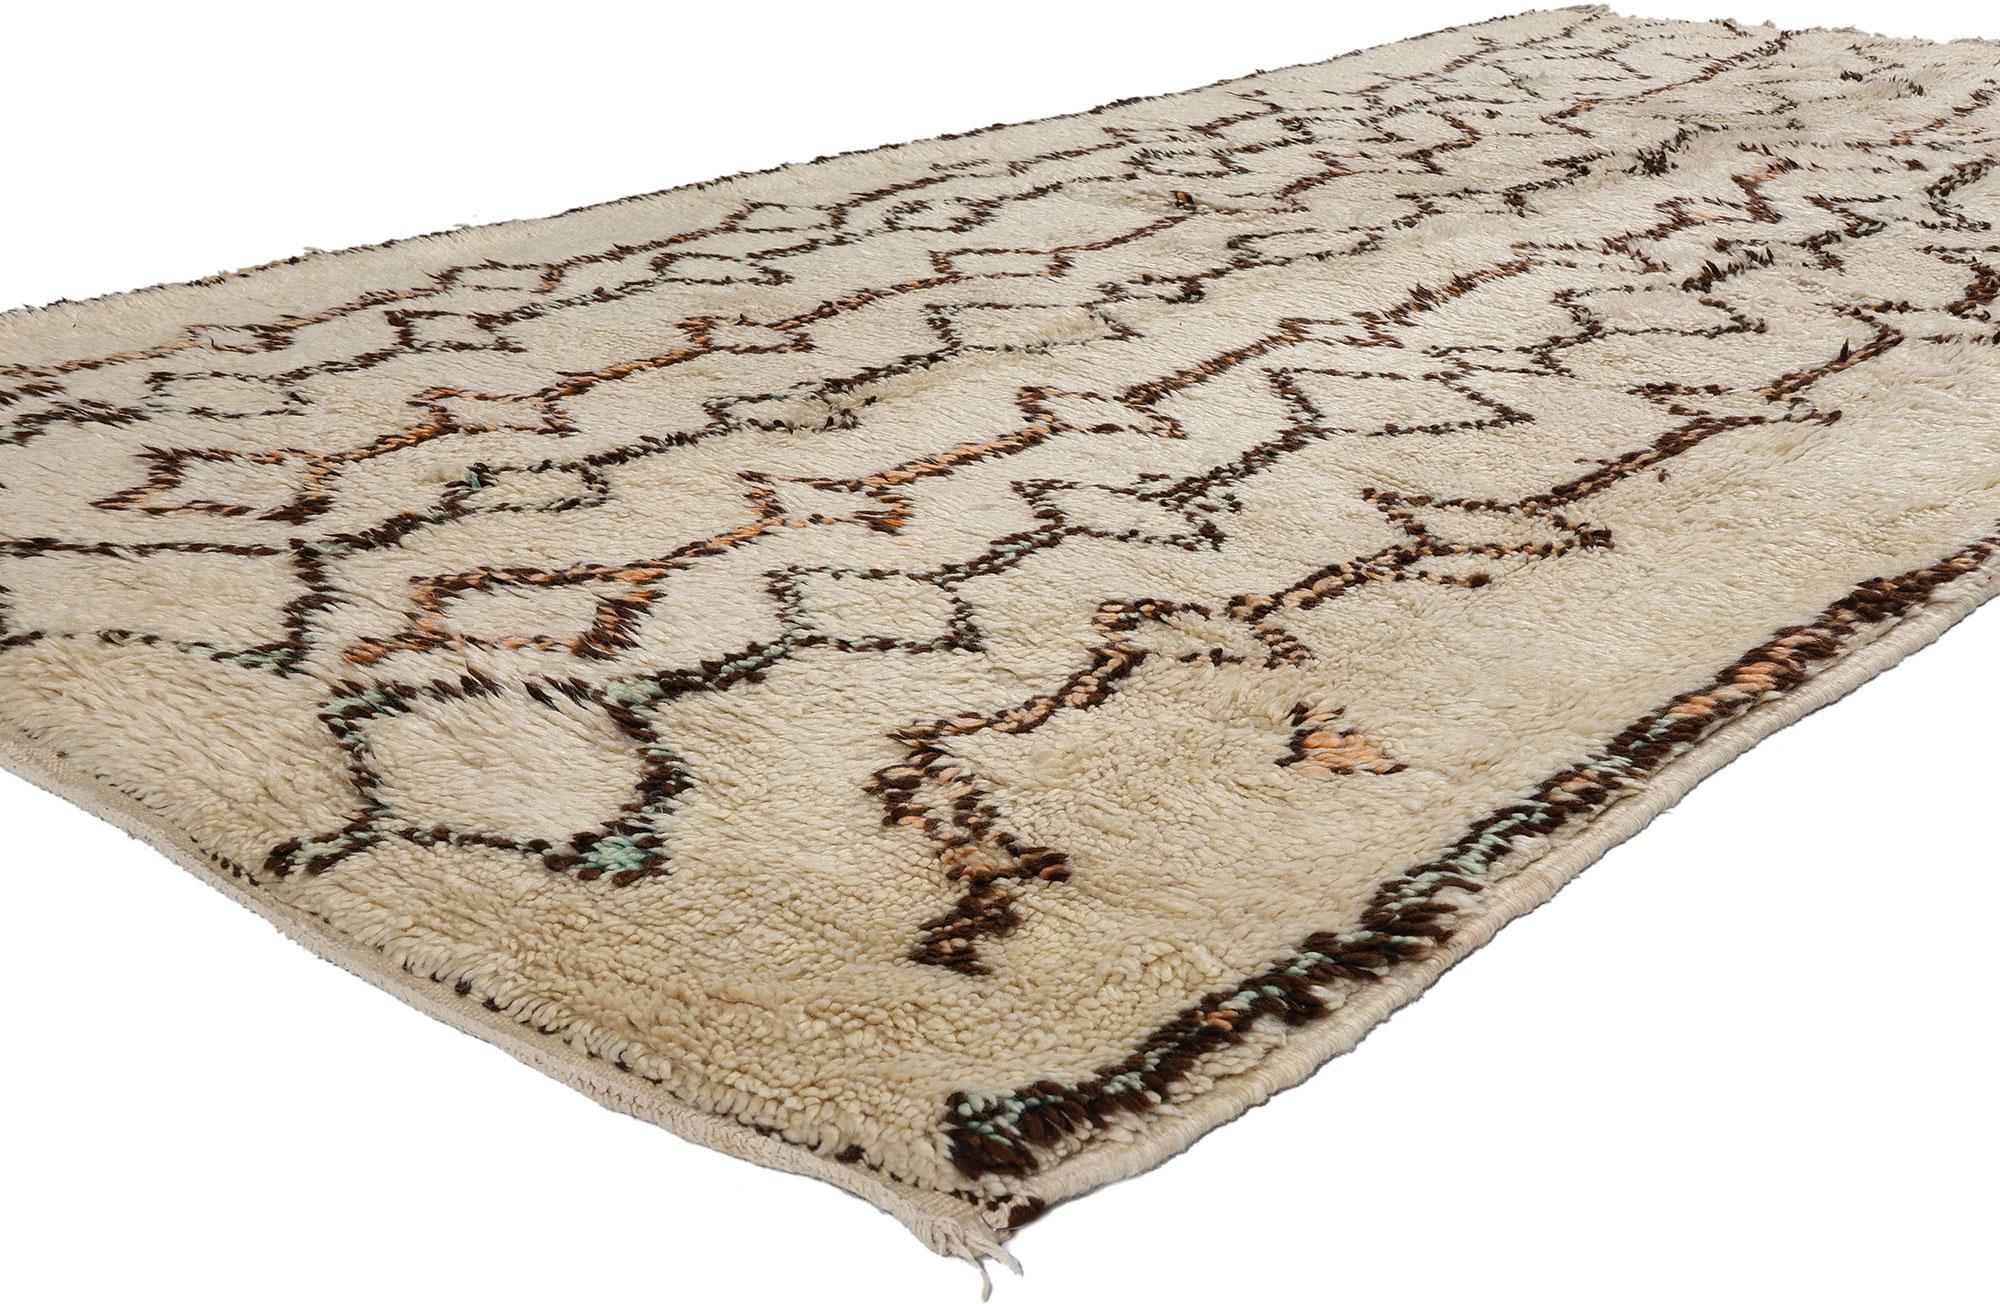 21789 Vintage Moroccan Beni Ourain Rug, 05'05 x 10'04. Hailing from the Beni Ourain tribe, a significant branch of the expansive Berber community in Morocco, these Moroccan rugs are expertly fashioned with untreated sheep's wool, highlighting their